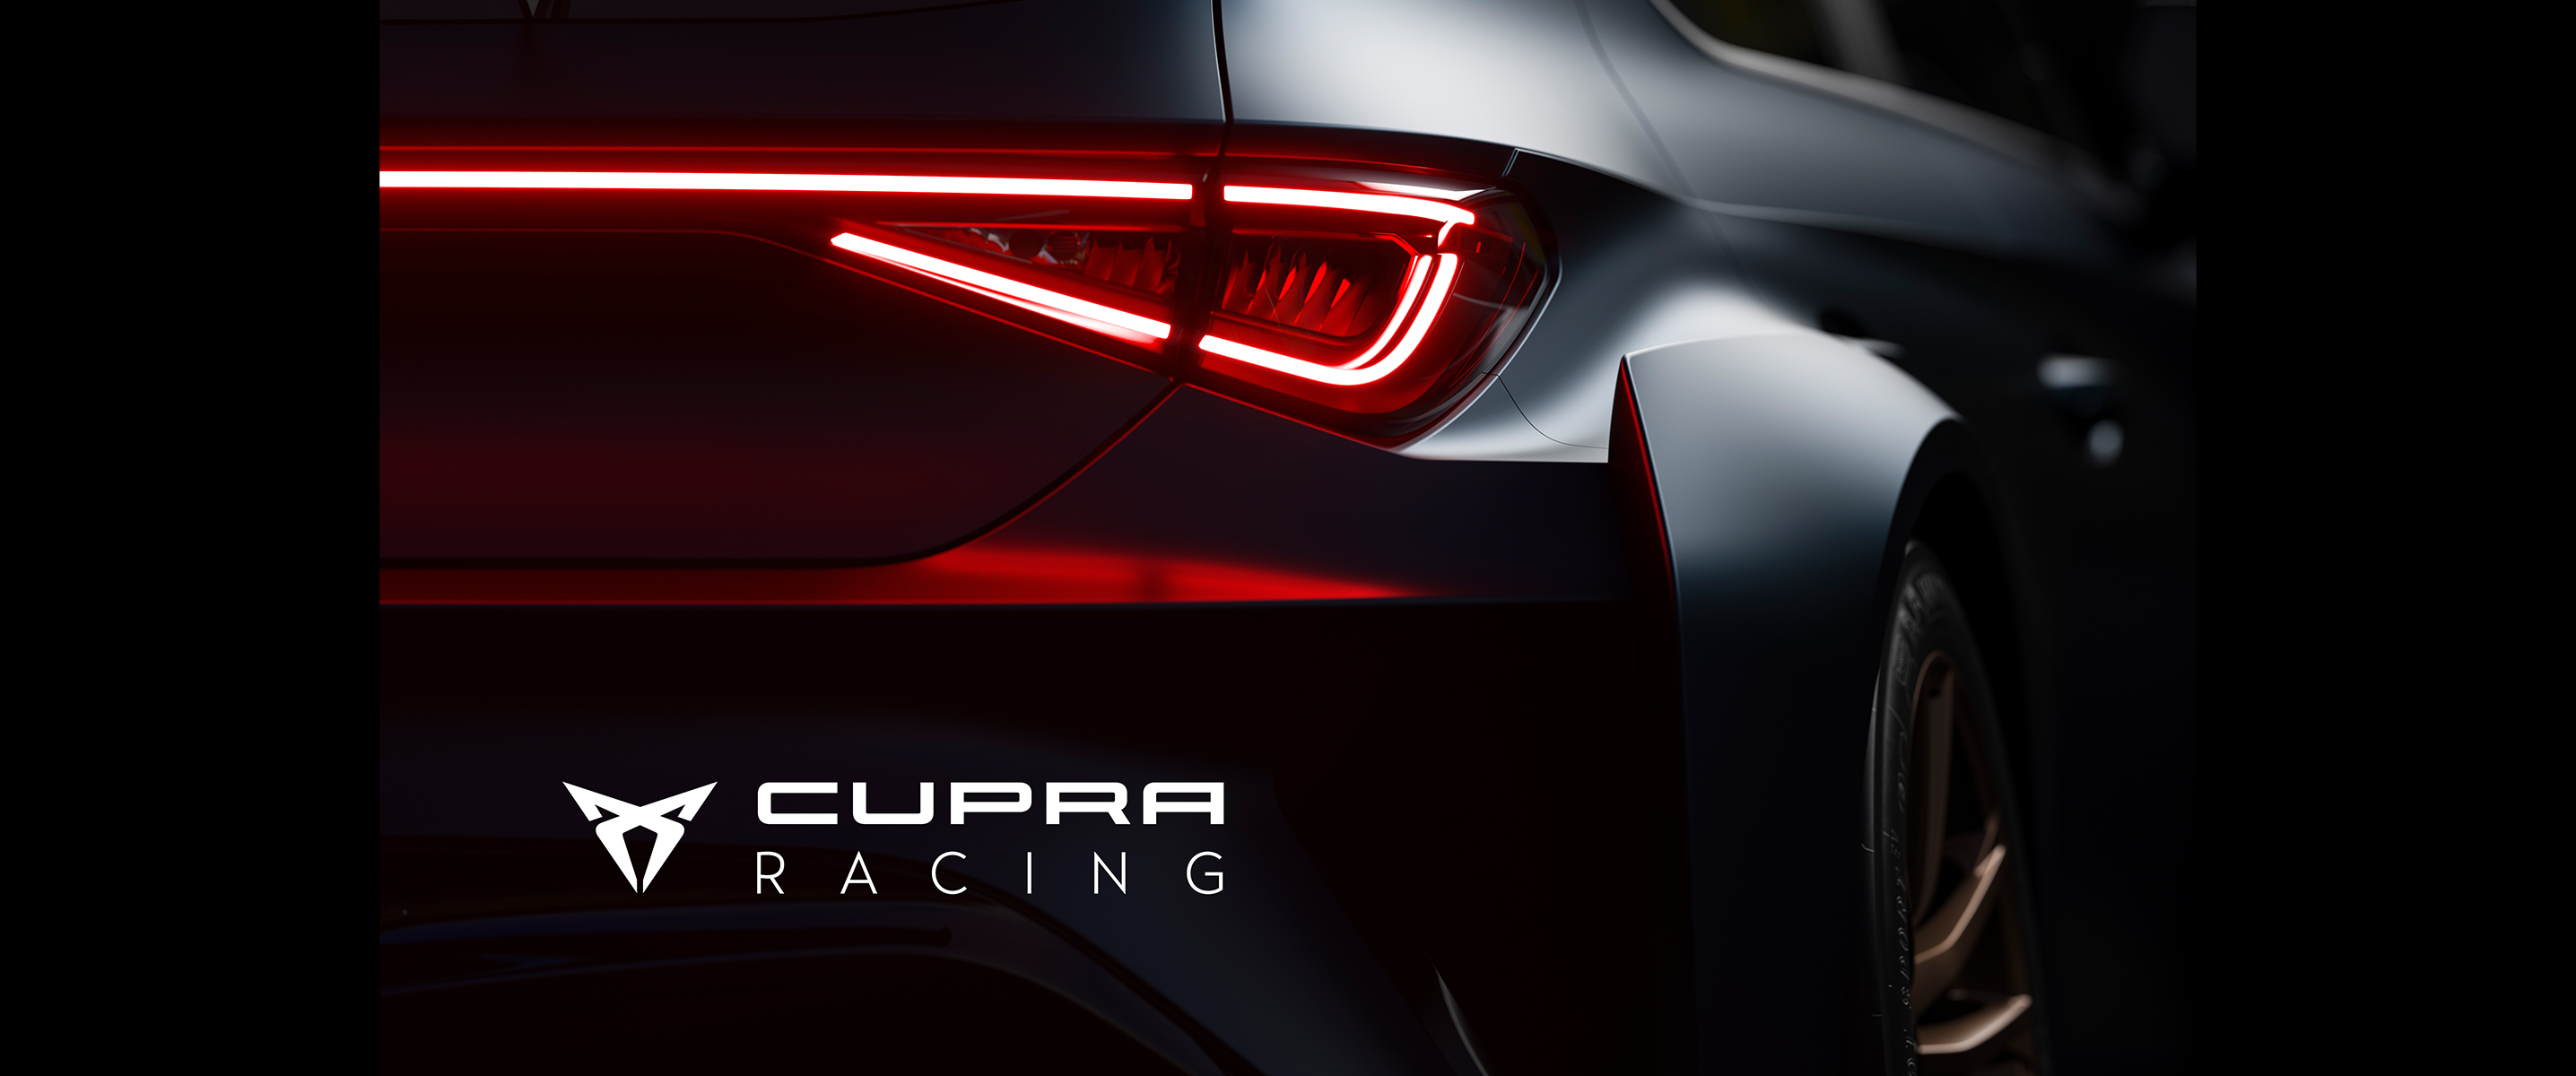 CUPRA starts pre-booking for its new TCR race car